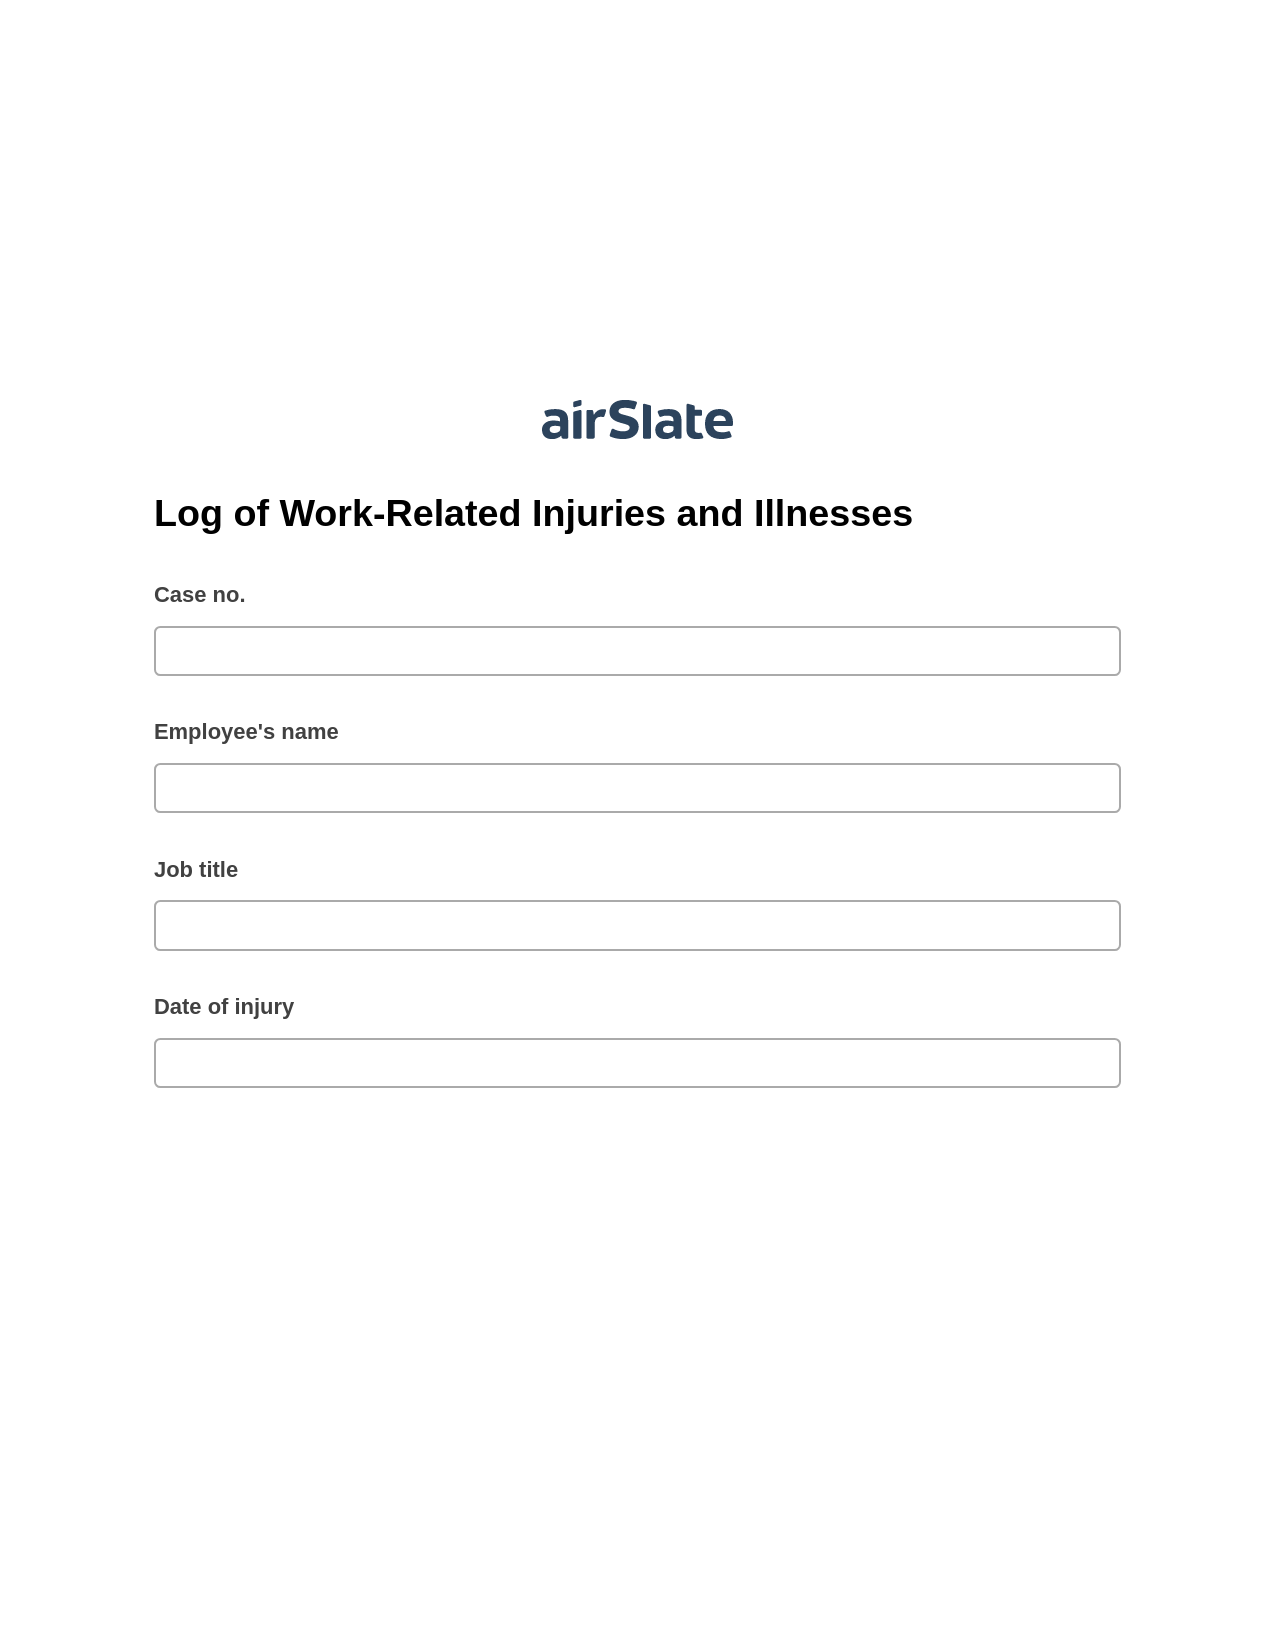 Log of Work-Related Injuries and Illnesses Pre-fill Slate from MS Dynamics 365 Records Bot, In-person Signing Bot, Post-finish Document Bot